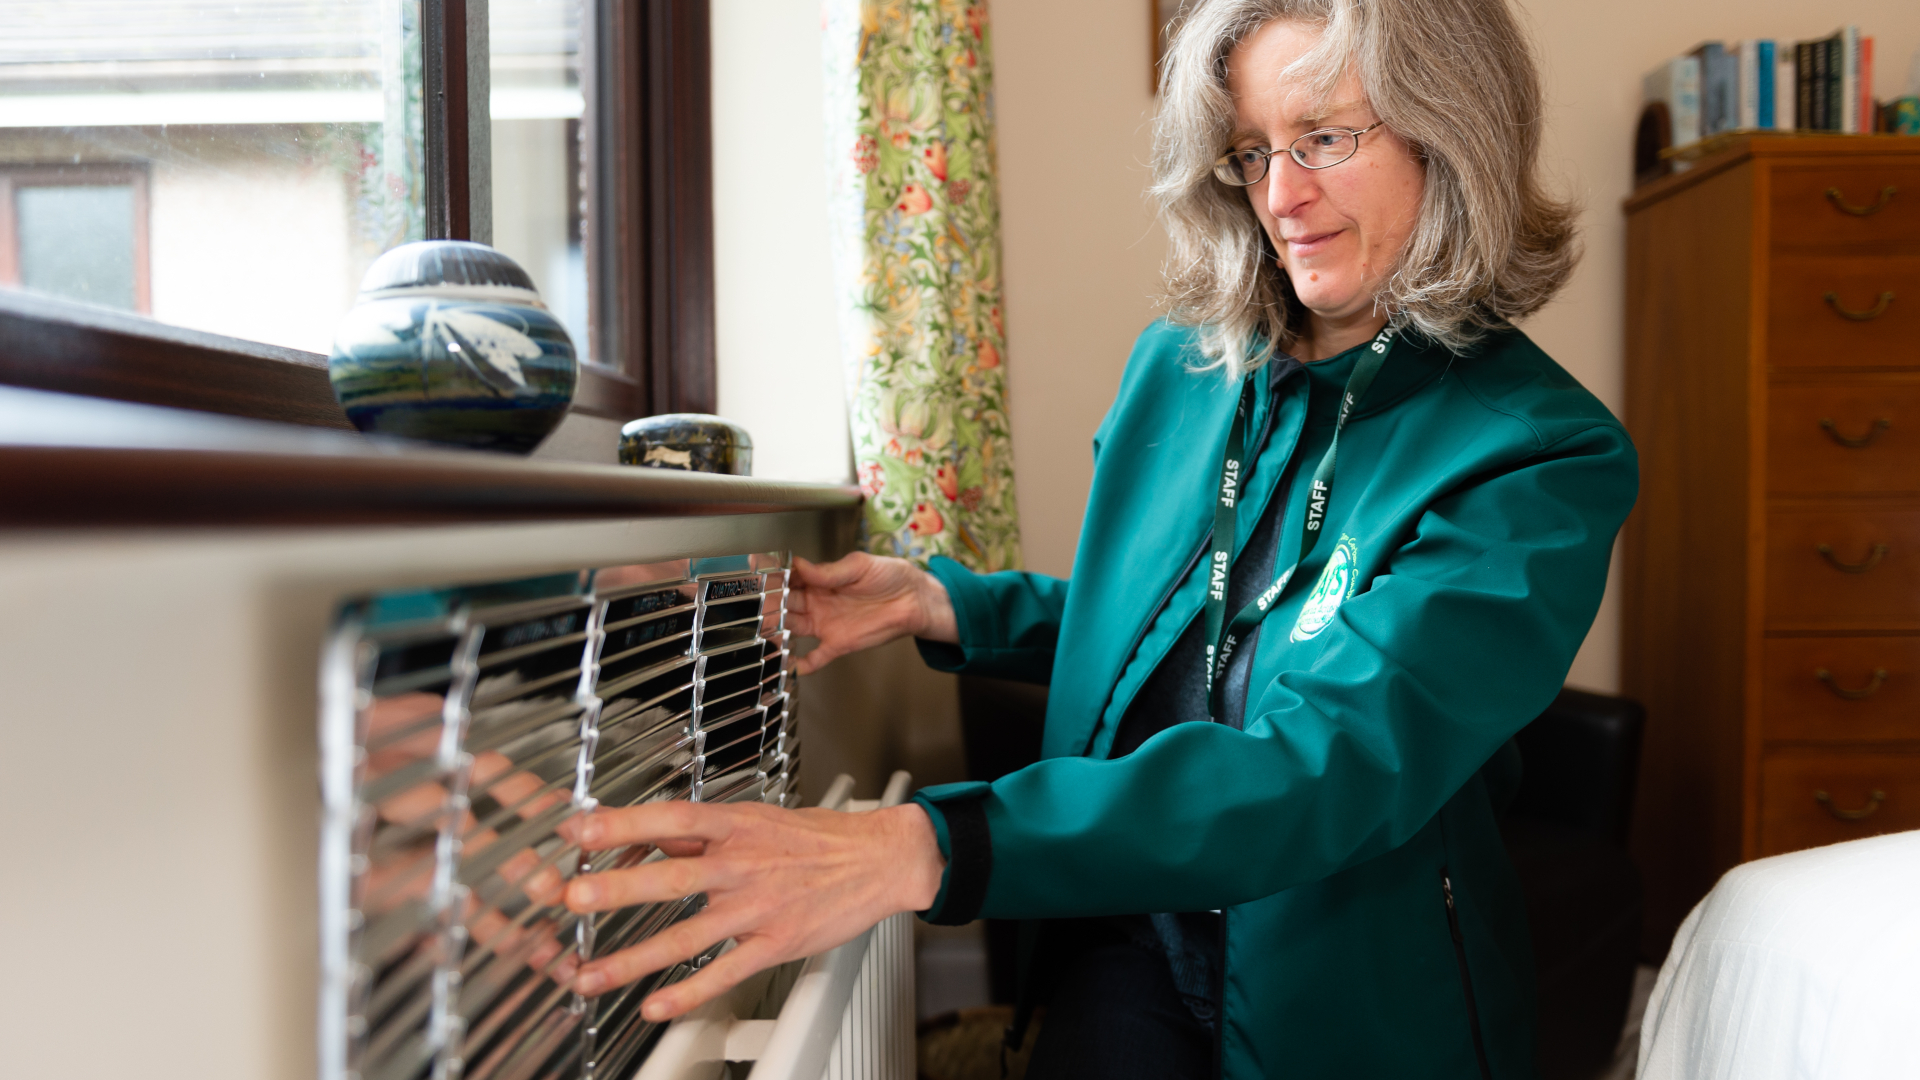 Tina from CAfS fits a radiator reflector during a Cold to Cosy Homes Cumbria visit